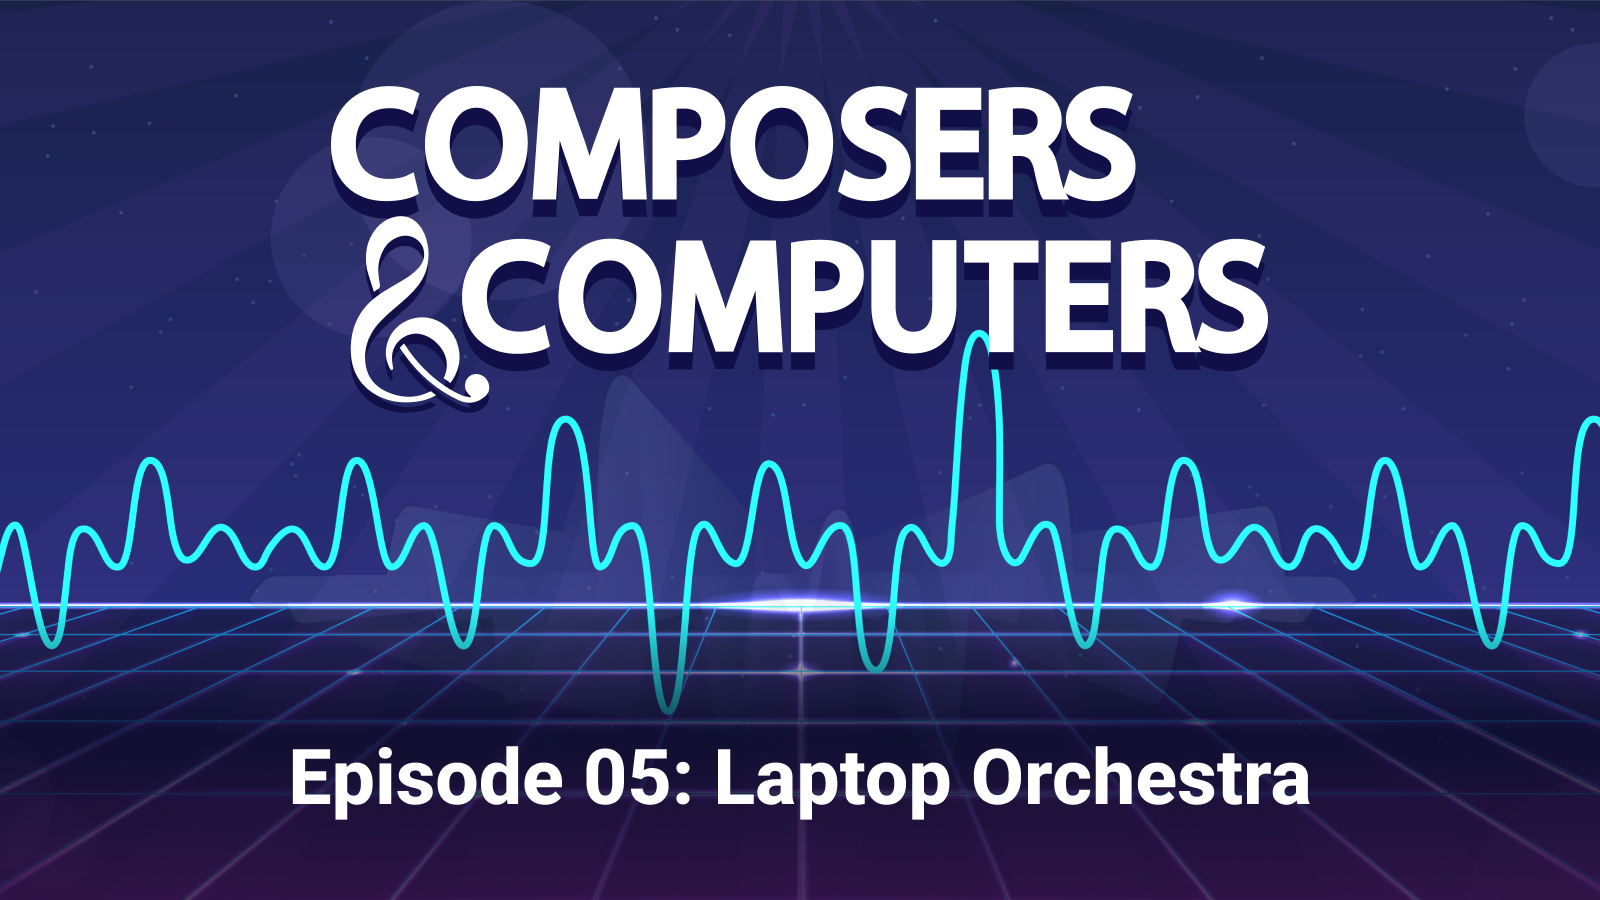 Episode 5: Laptop Orchestra. Composers & Computers, the ampersand is a treble clef. There is an image of a sound file.